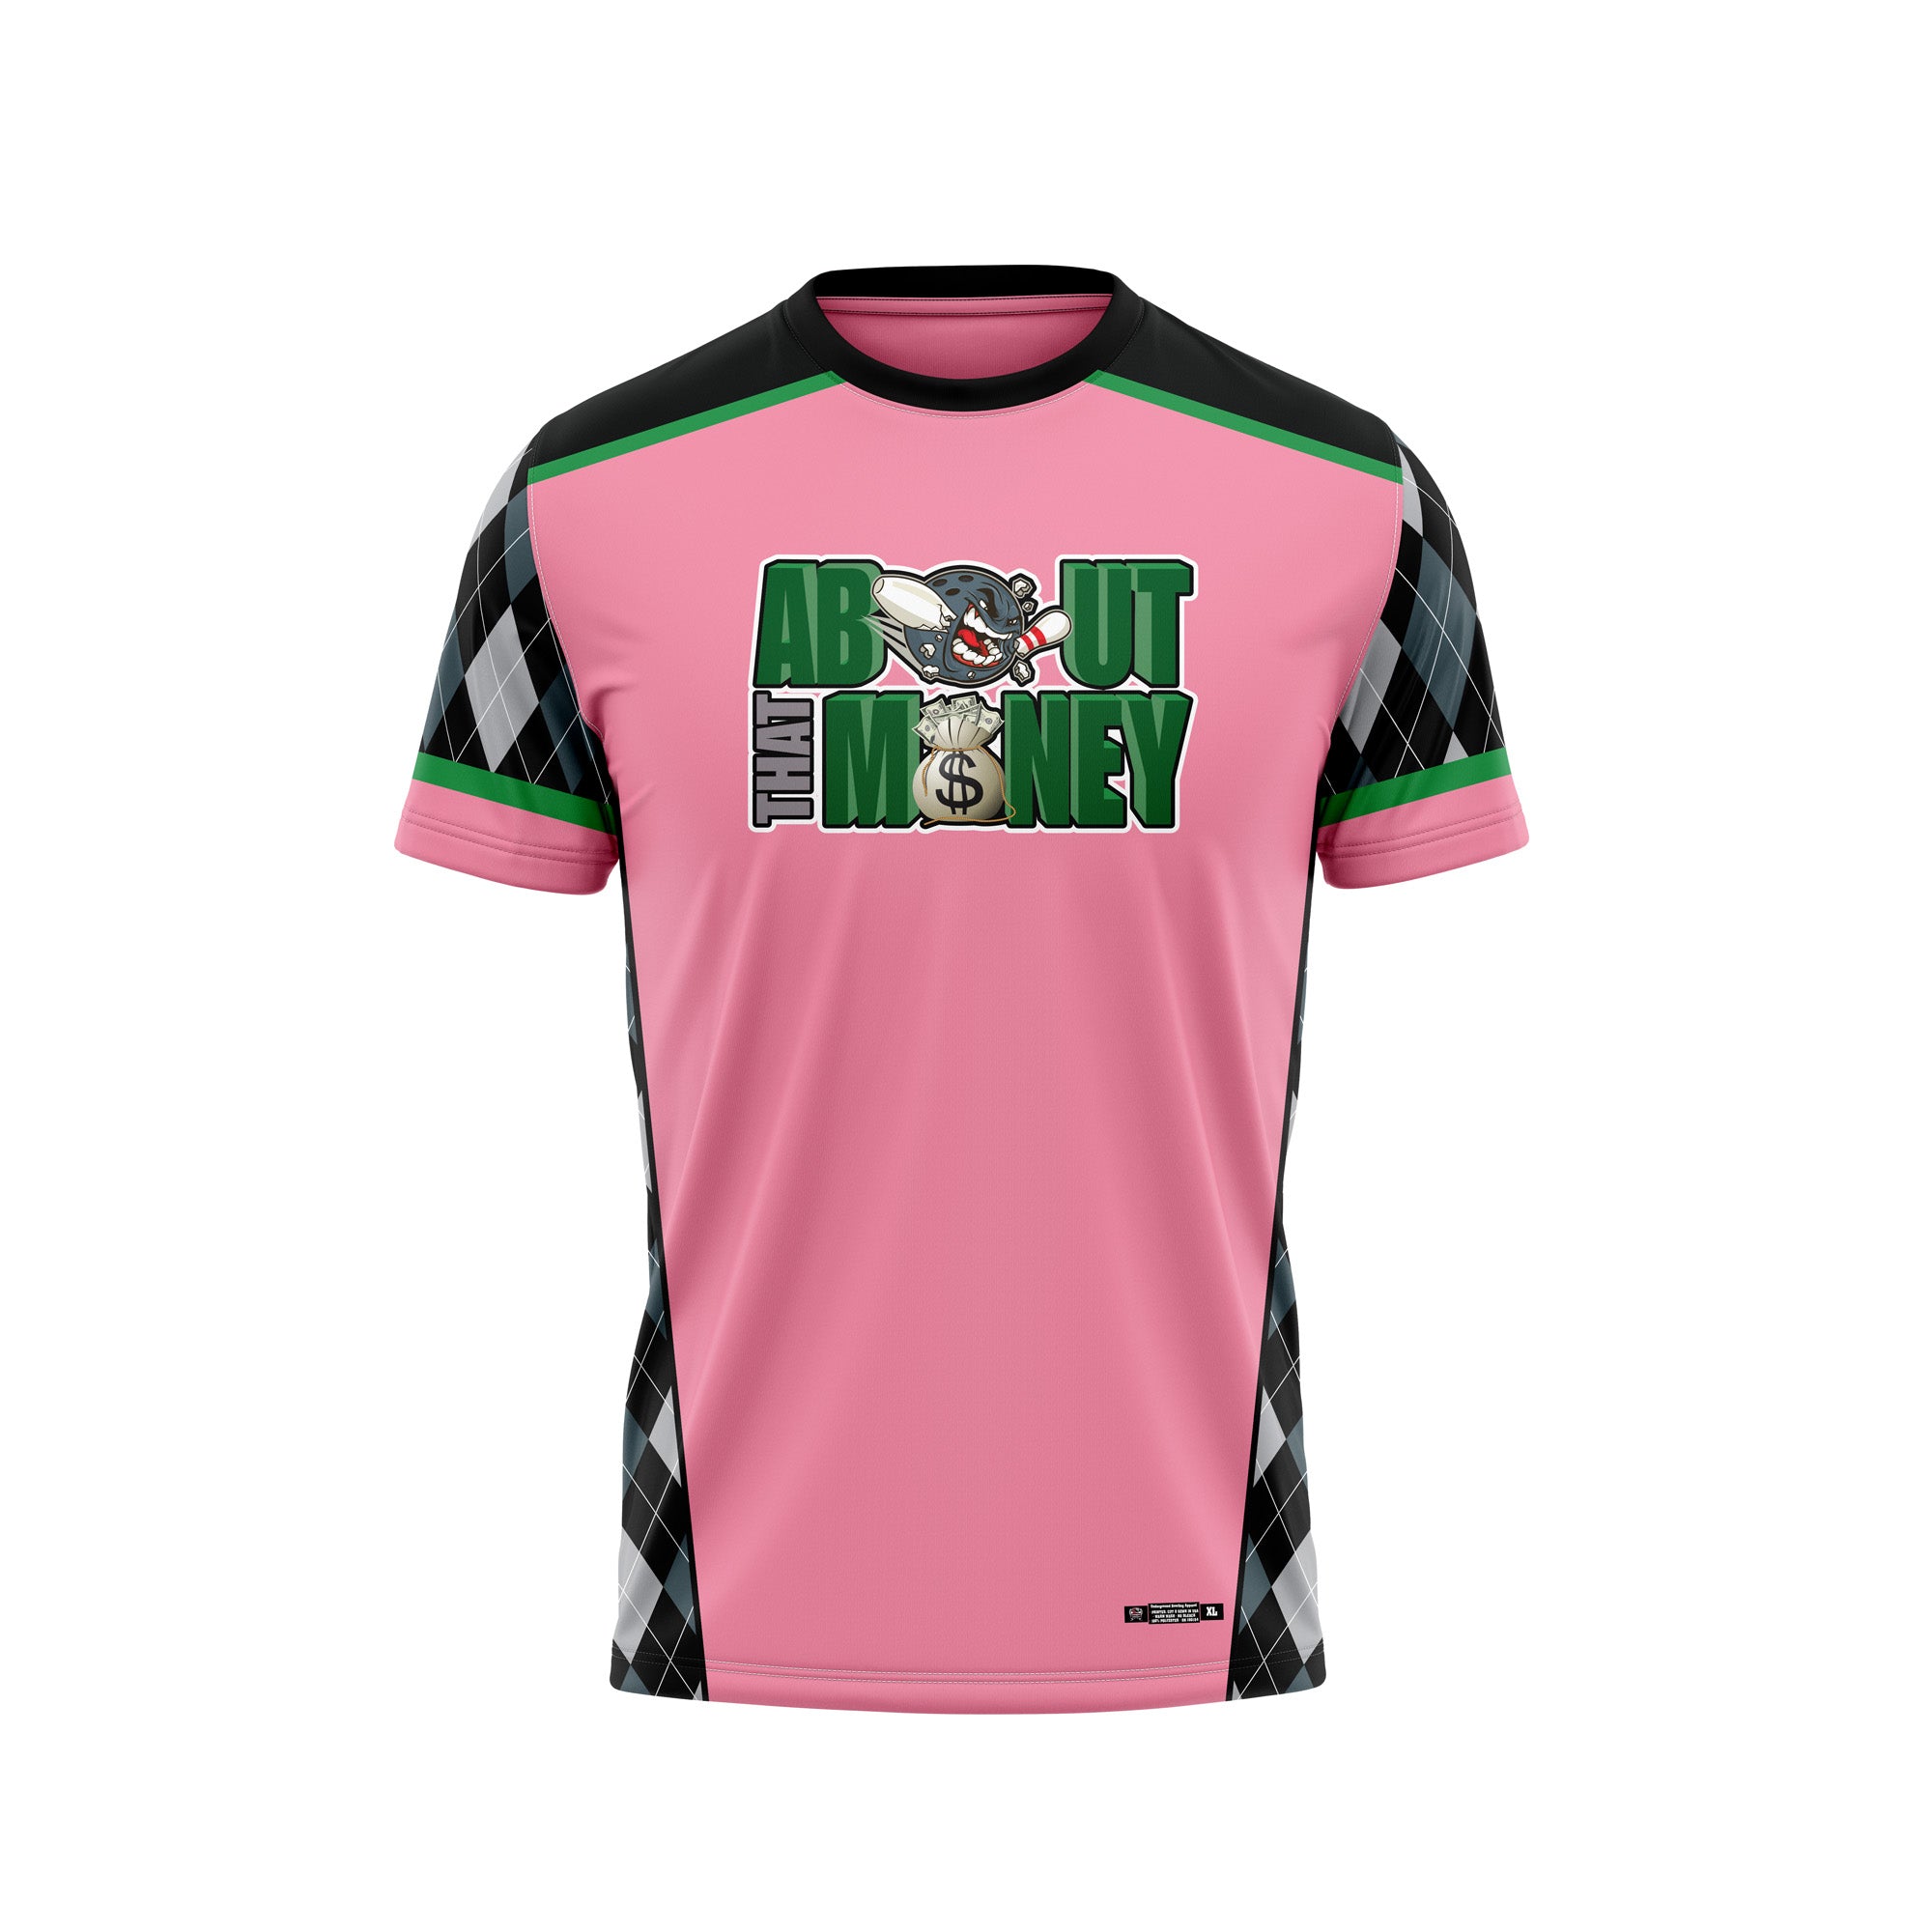 About The Money Breast Cancer Jerseys